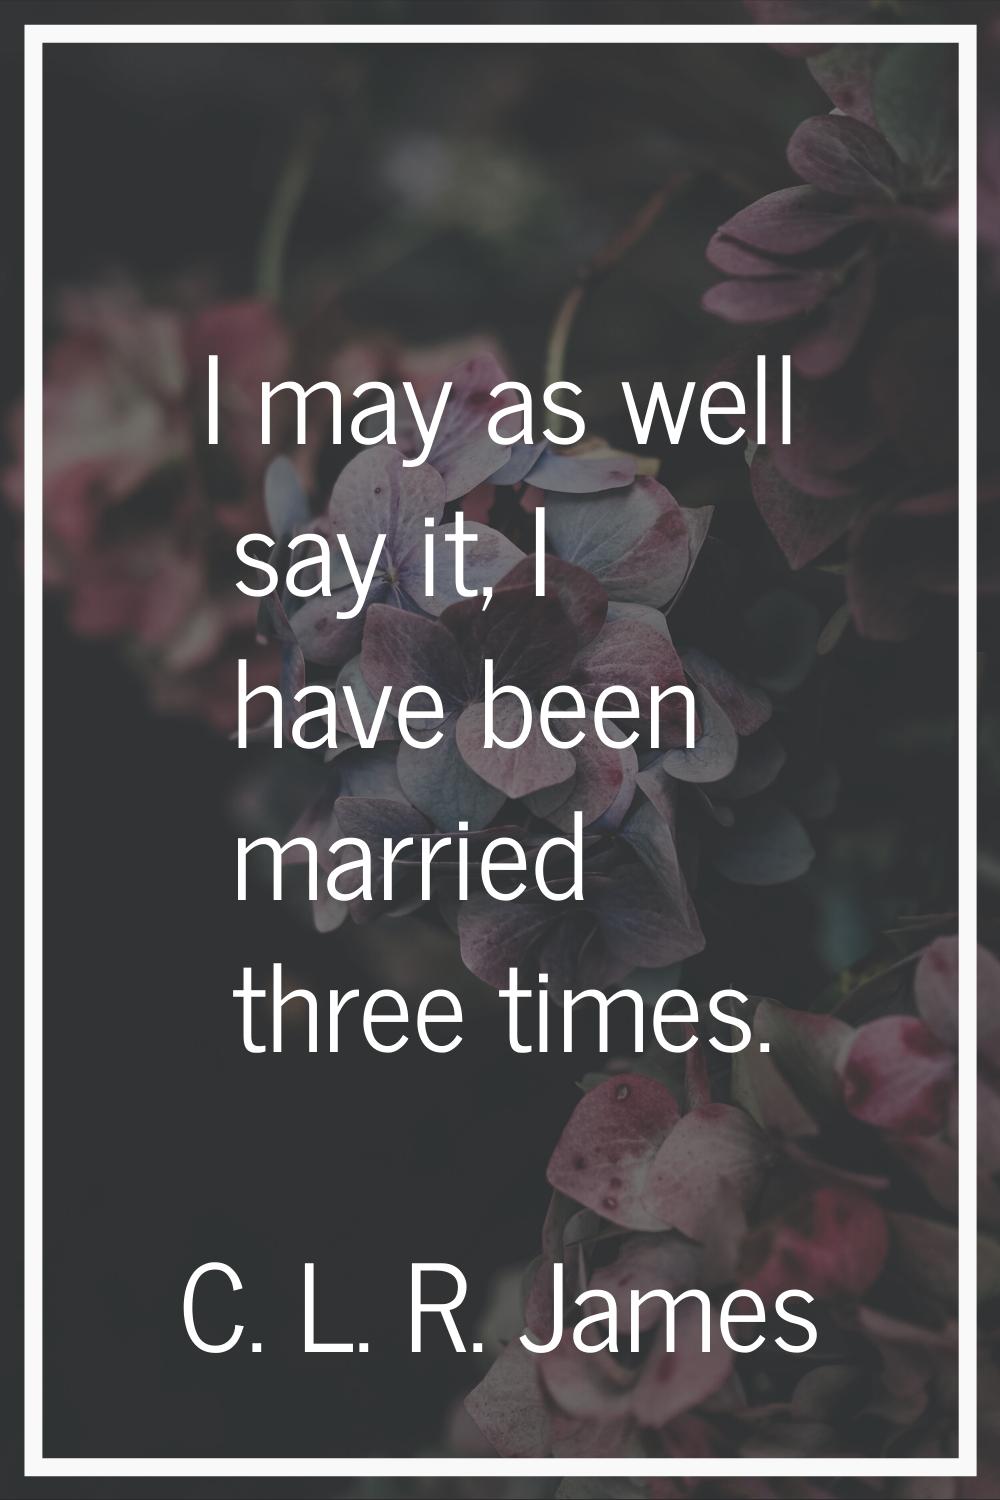 I may as well say it, I have been married three times.